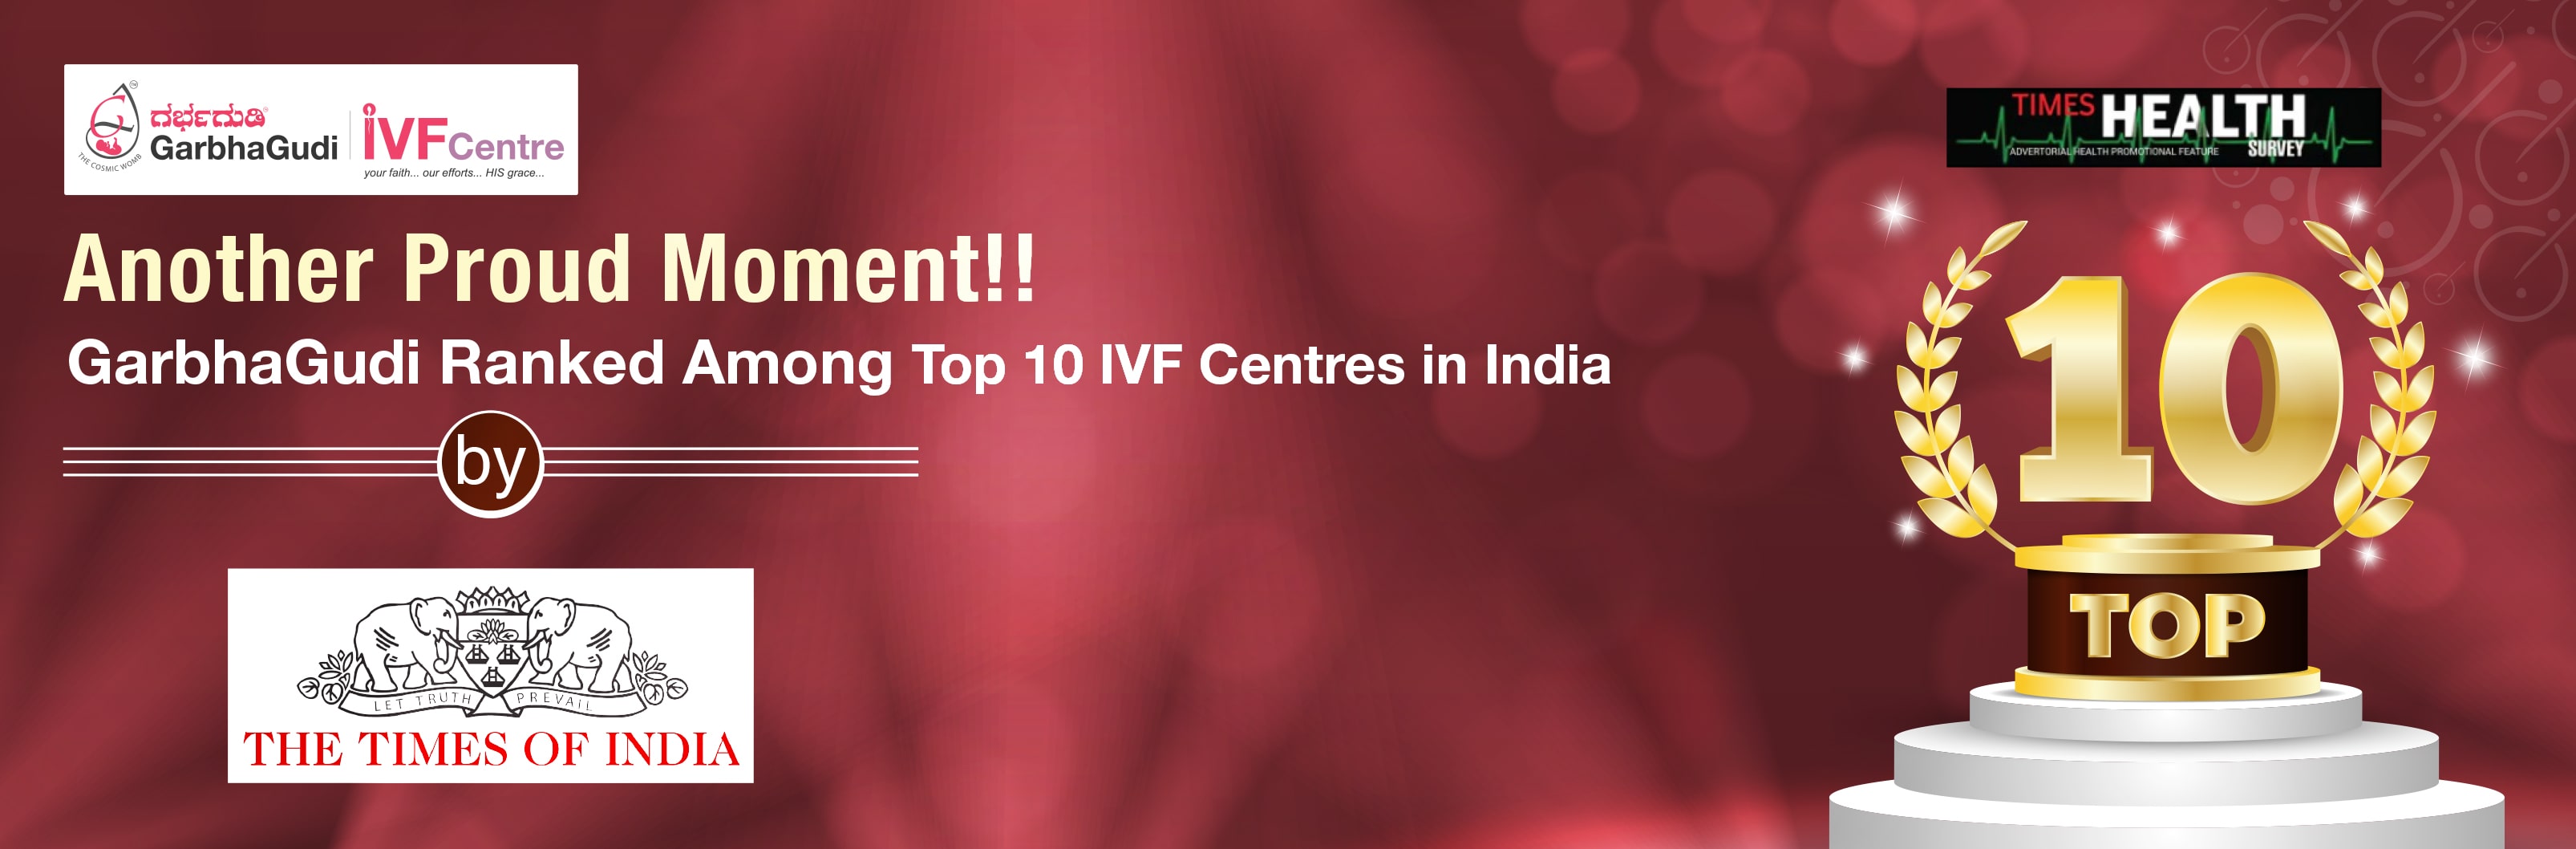 GarbhaGudi Ranked Among Top 10 IVF Centres in India - Times Health Survey 